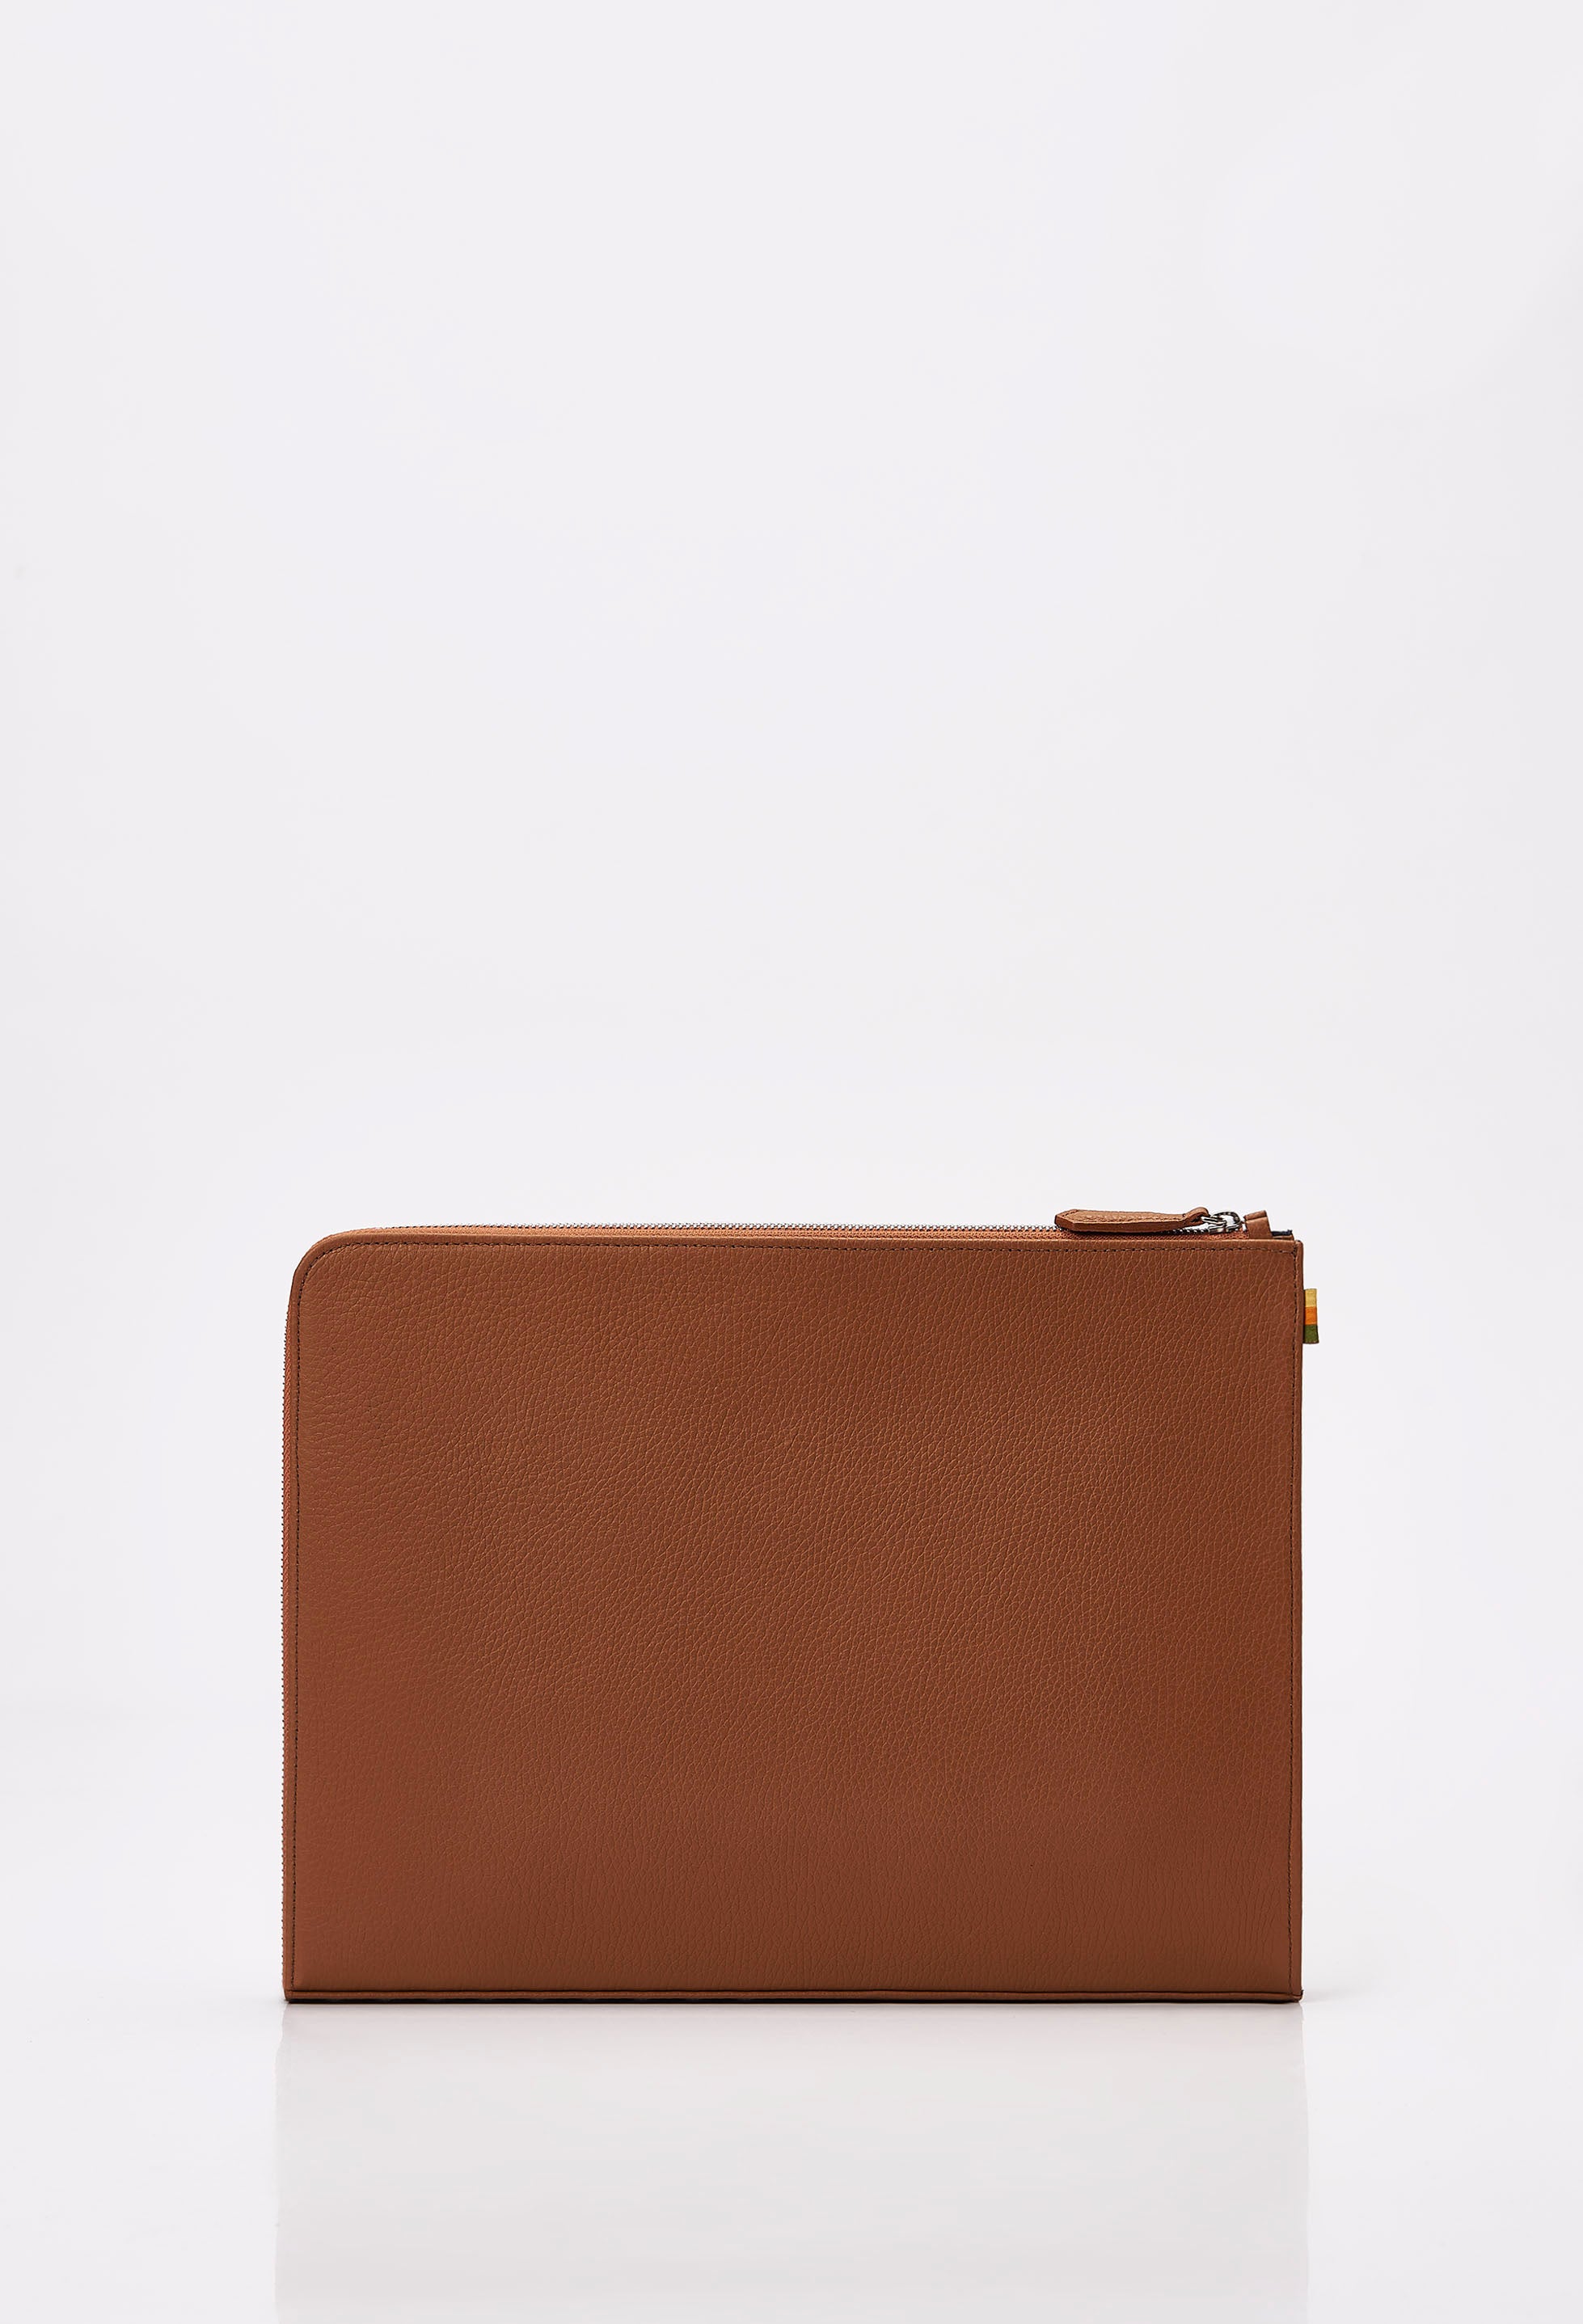 Rear of a Tan Leather Slim Computer Case.